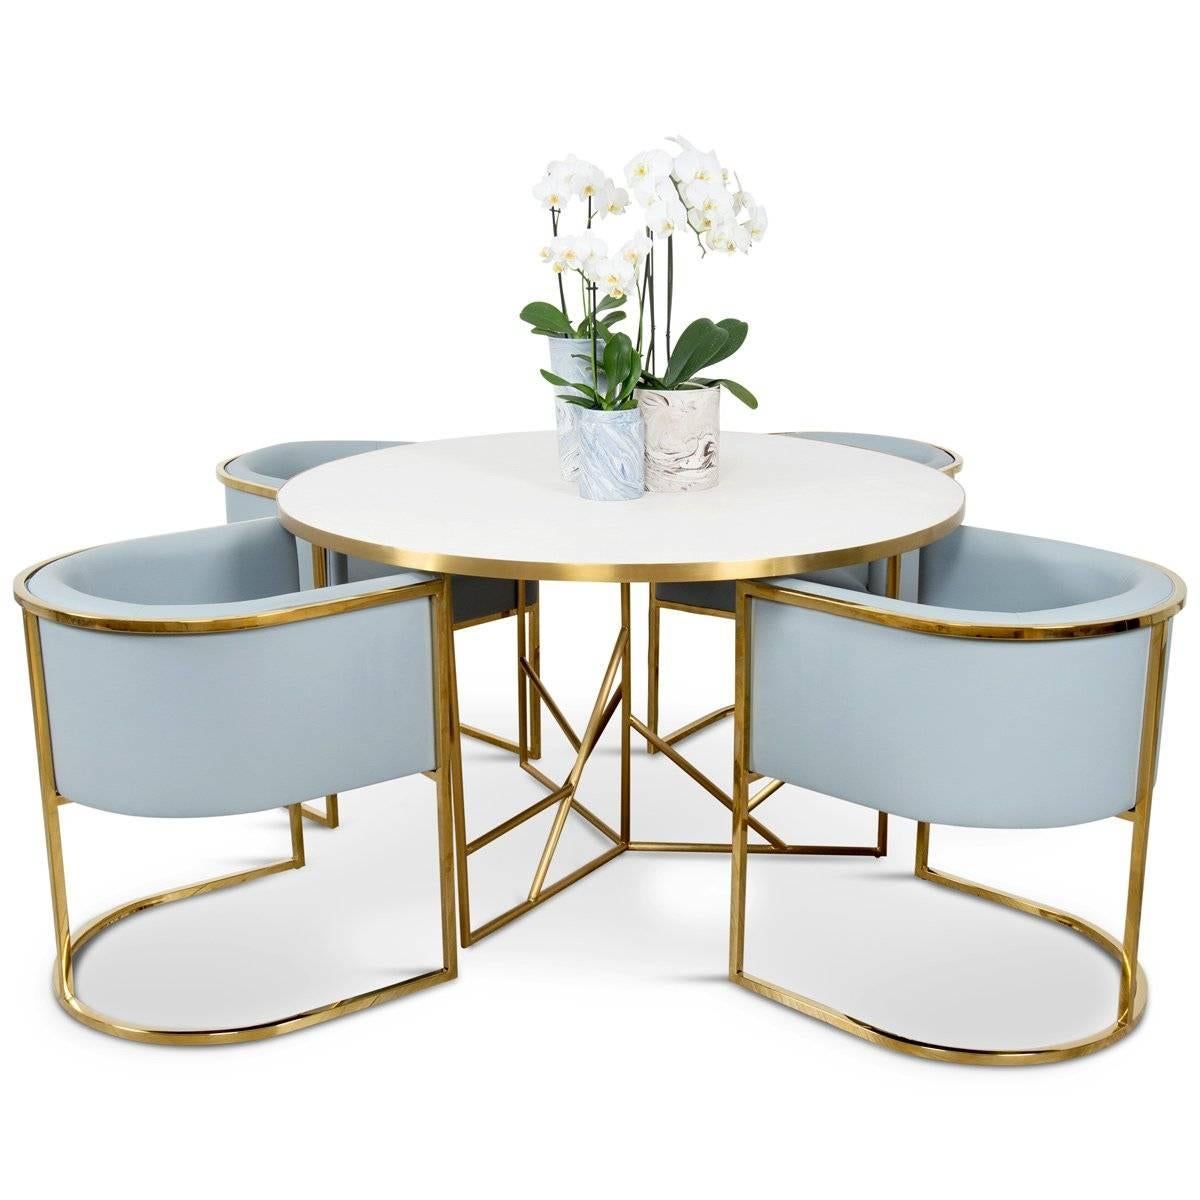 The Martinique dining table is the newest addition to the Martinique collection. The top of white stone-like concrete and the geometric negative space in the legs contrast to create perfect visual balance. Featuring a brushed brass frame and base